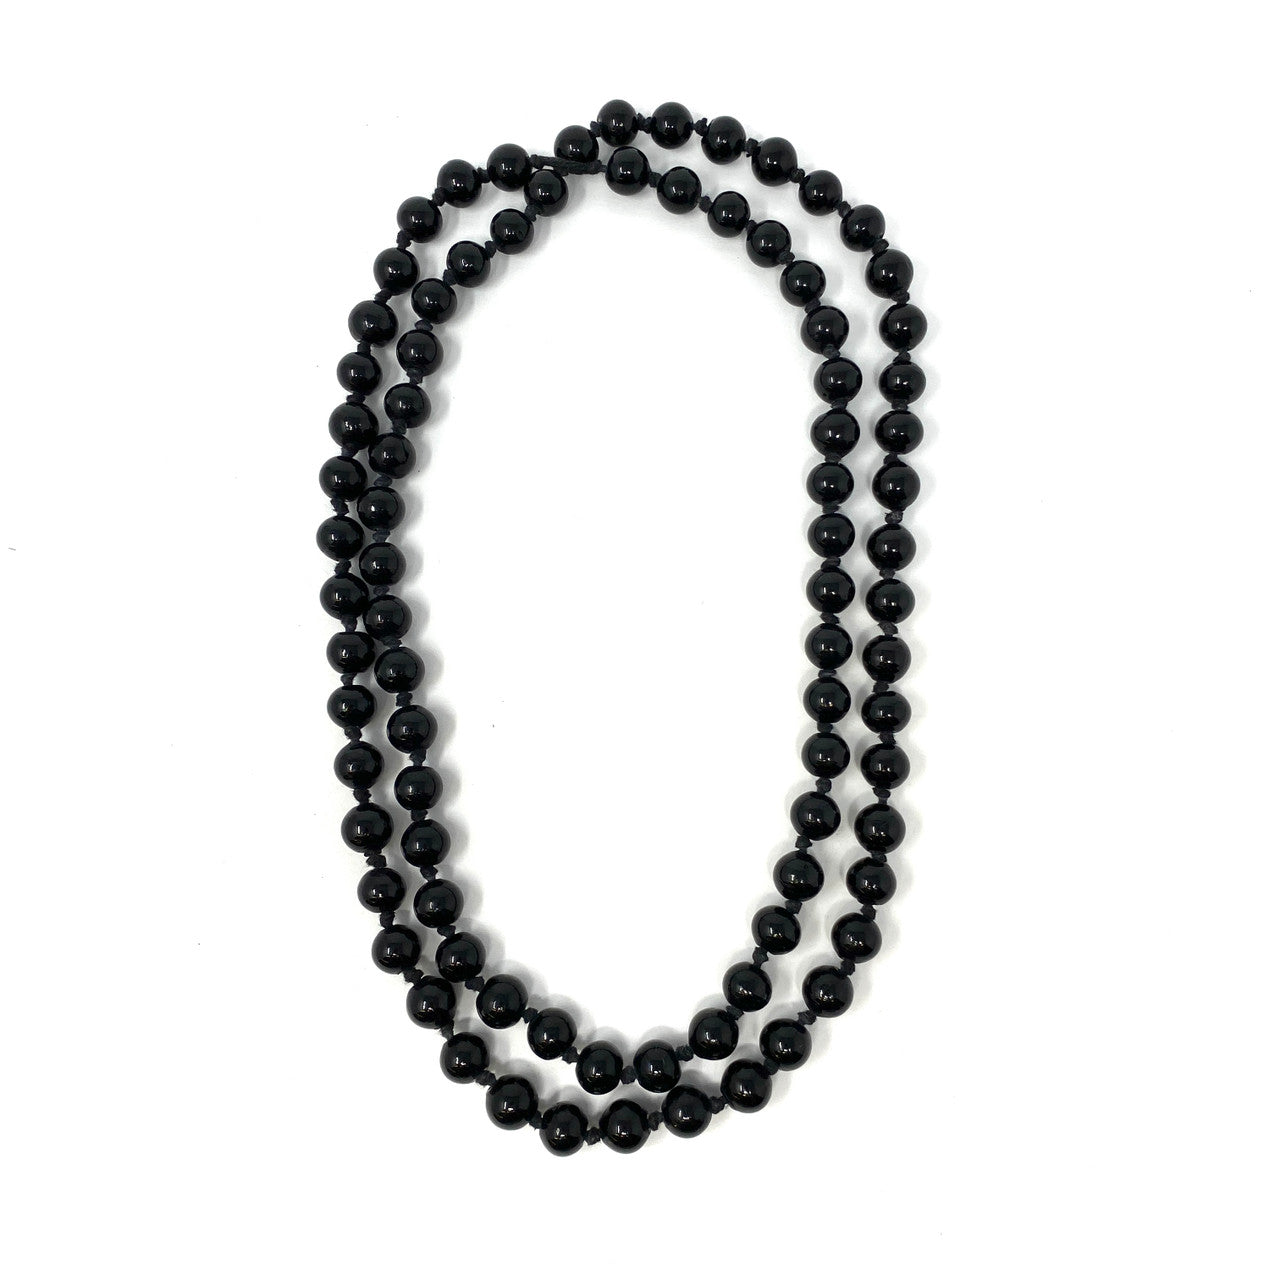 Black Beads Knotted Double Wrap Necklace- Wrapped